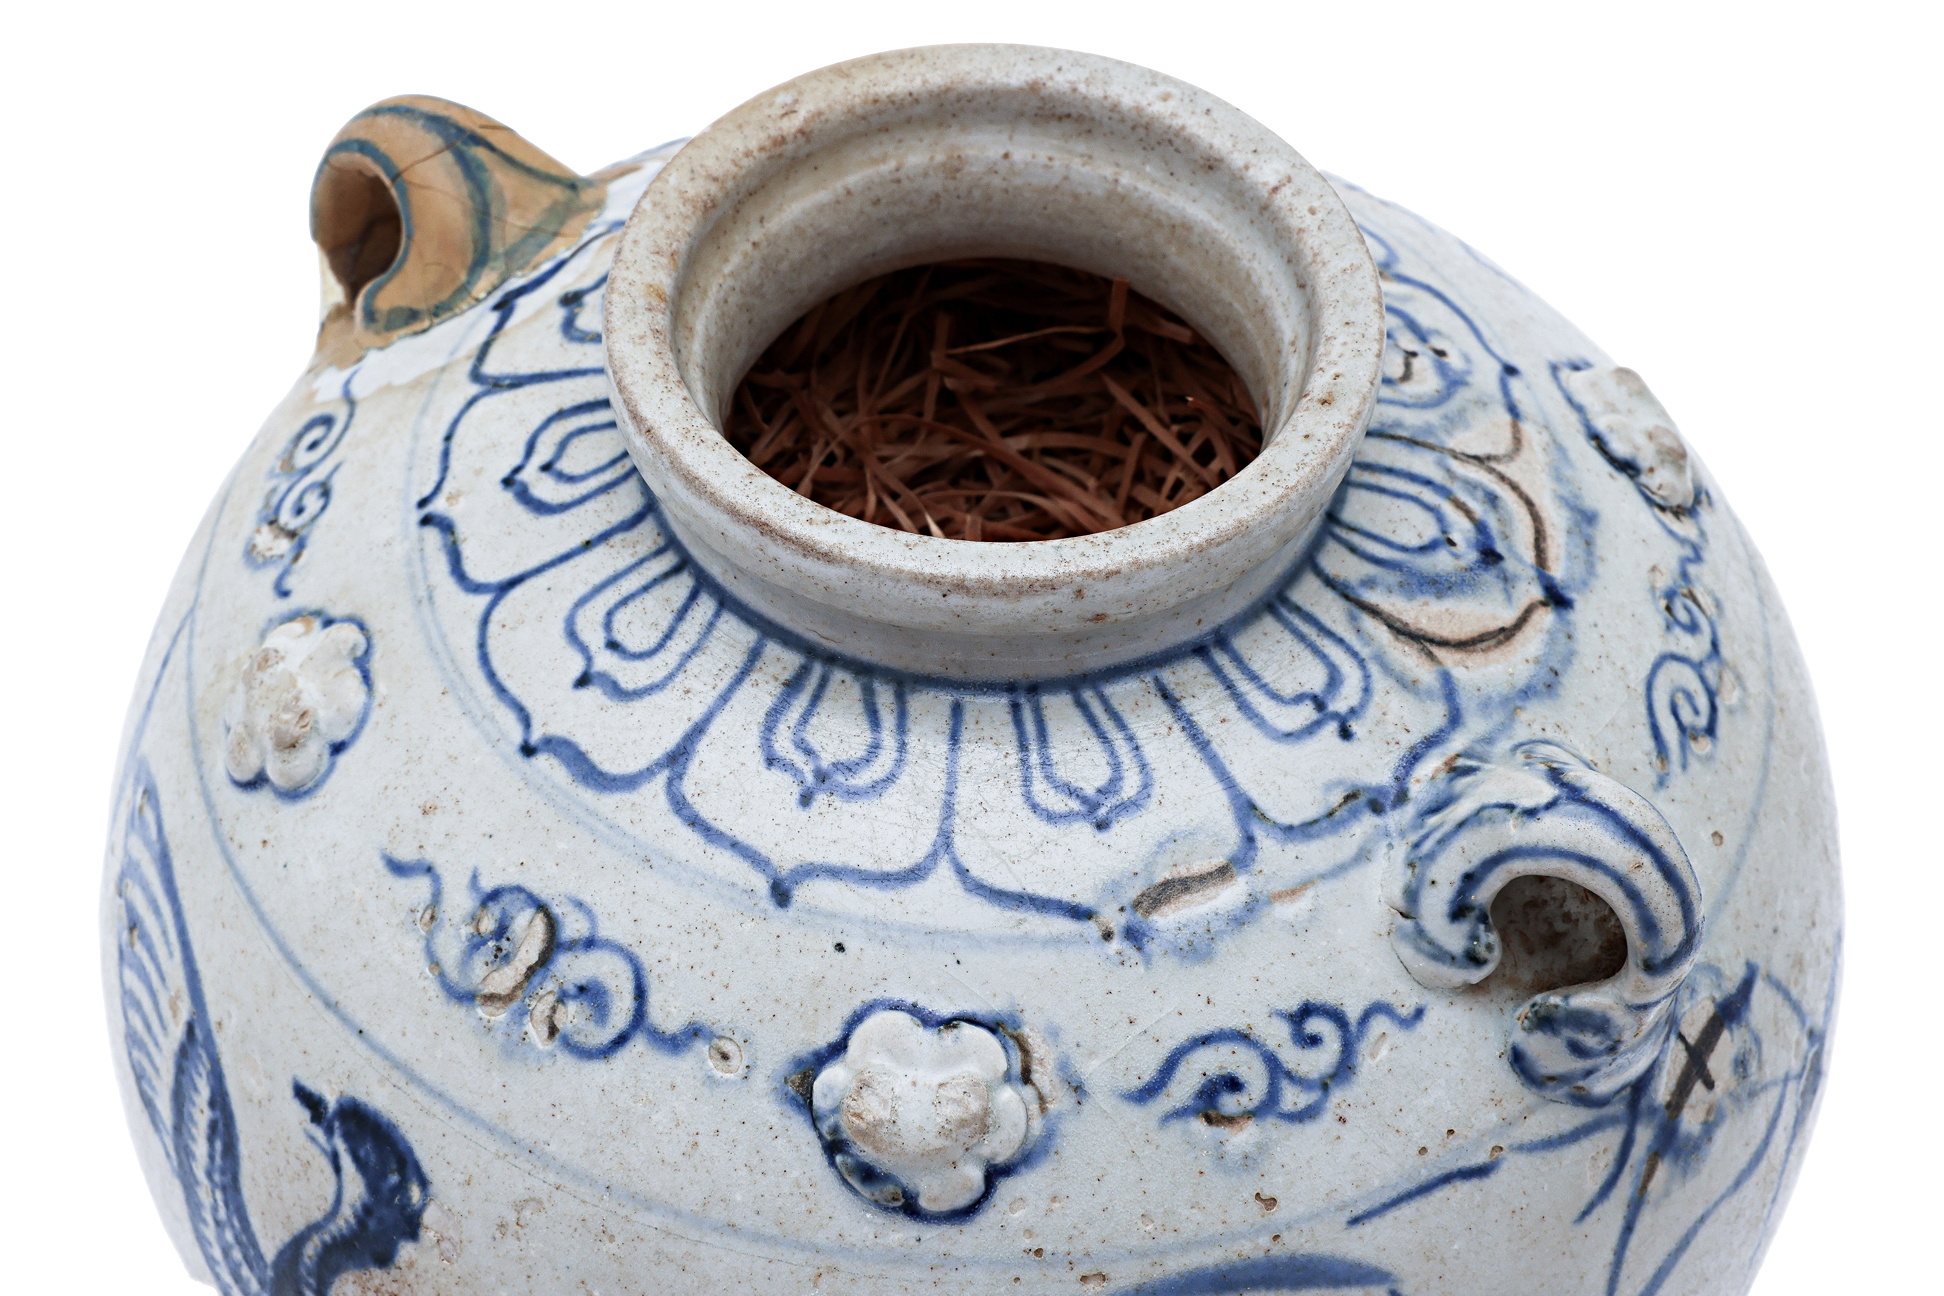 A VIETNAMESE BLUE AND WHITE JAR DECORATED WITH FLYING GEESE - Image 3 of 4